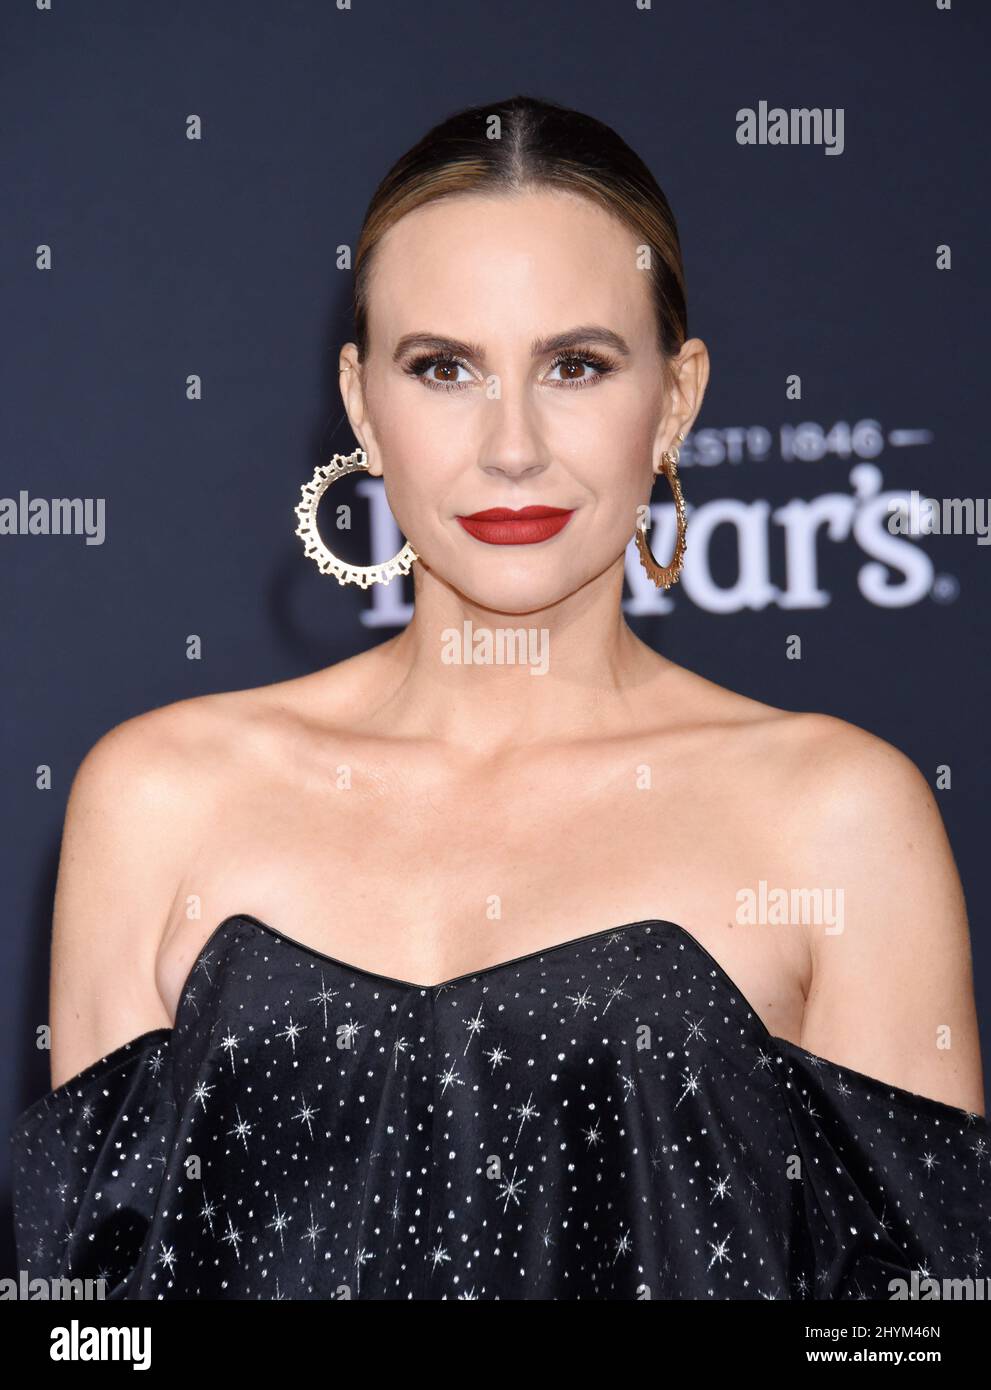 Keltie Knight at the "Knives Out" Los Angeles Premiere held at the